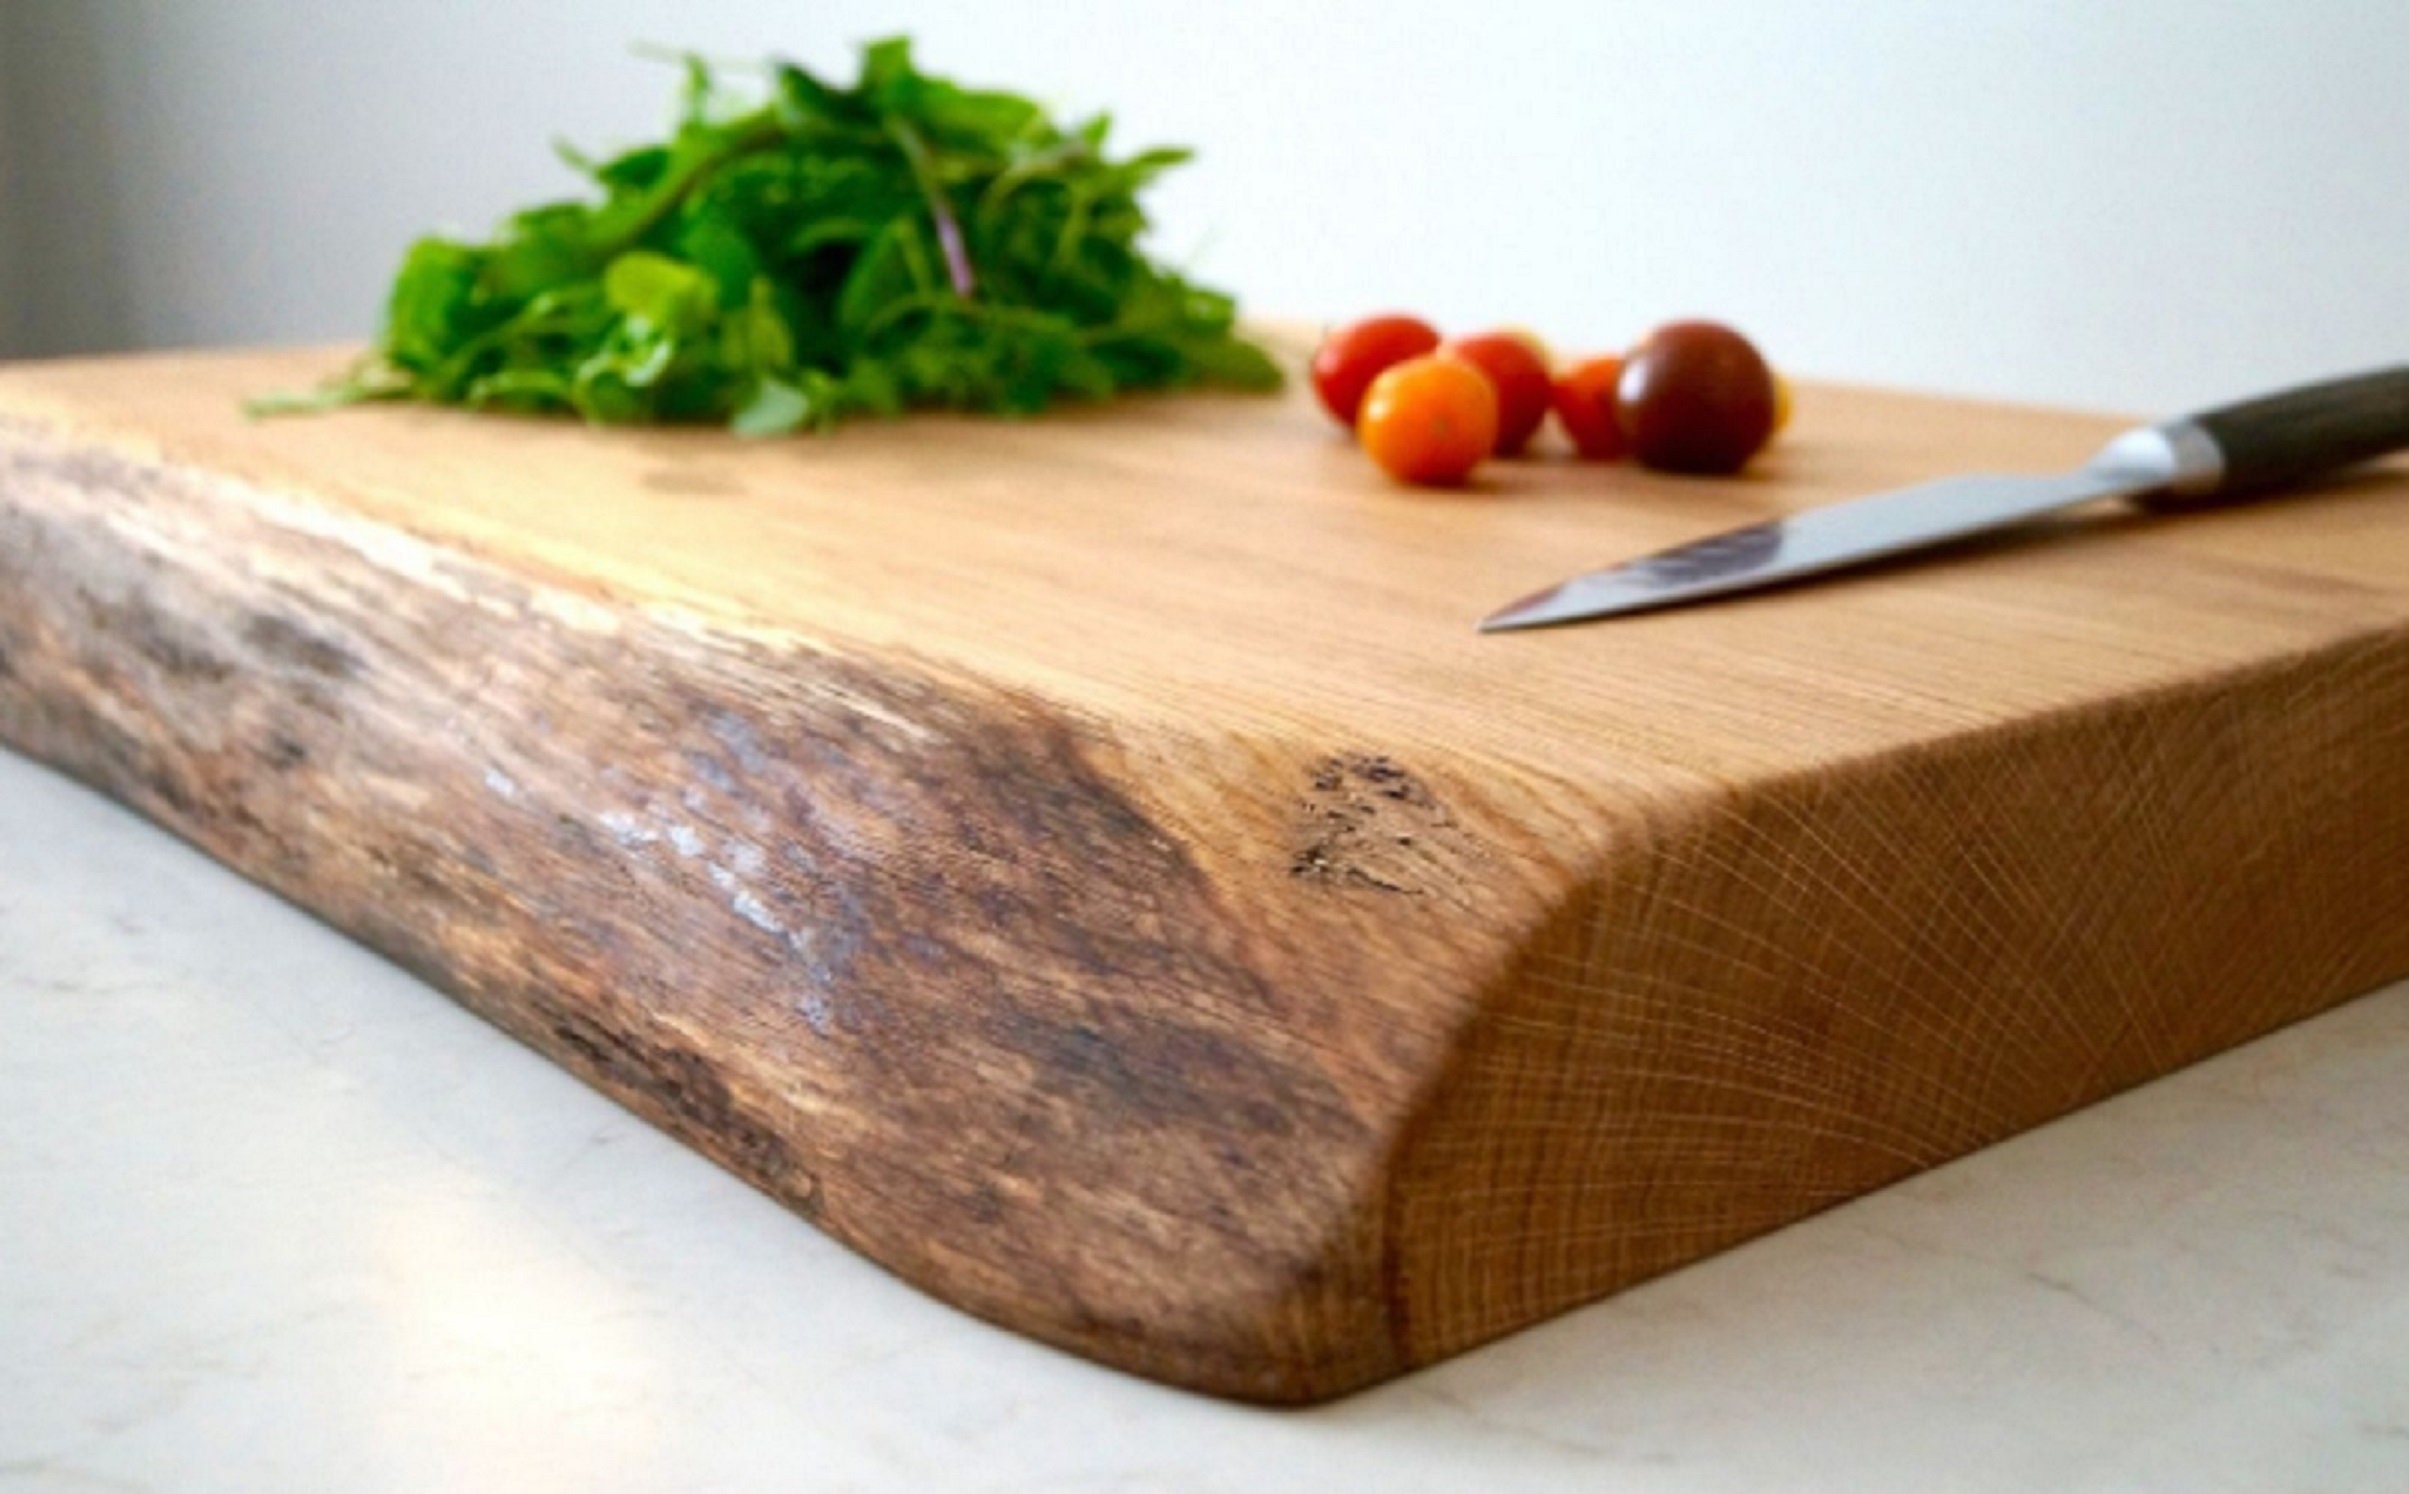 Can you dishwash wooden chopping boards